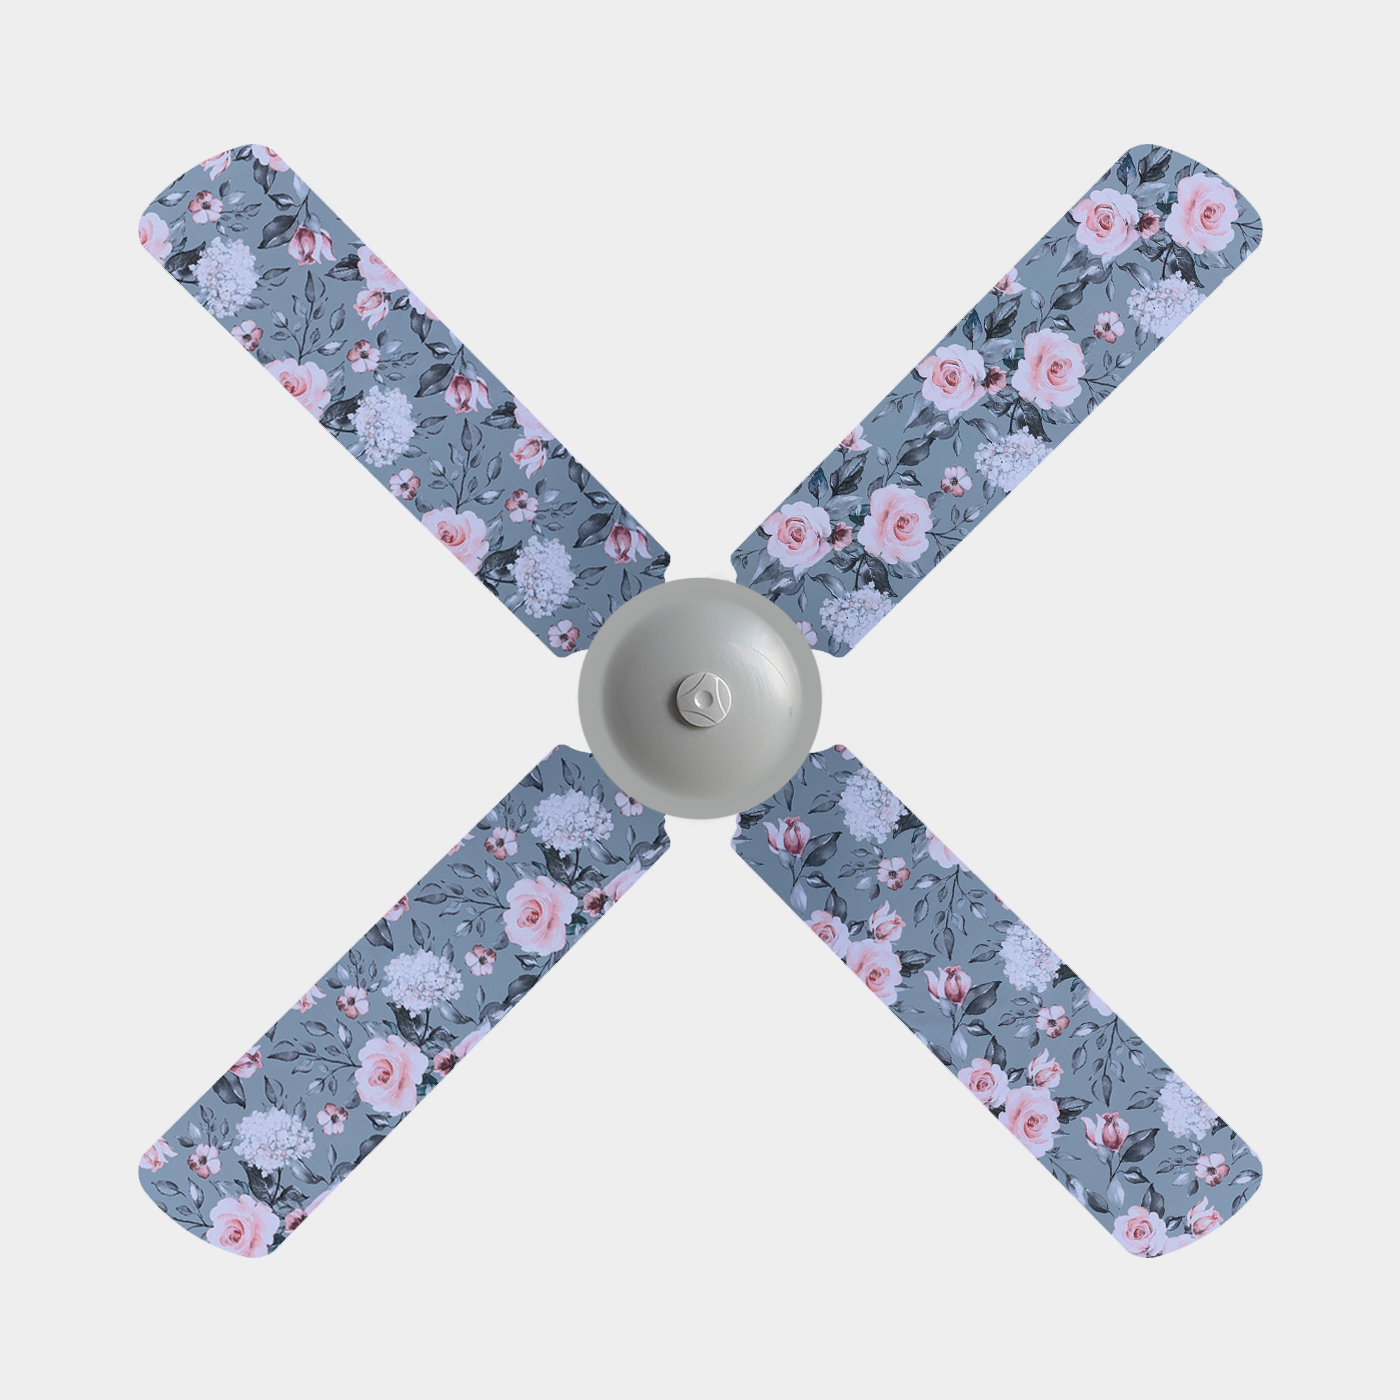 Ceiling fan covers with grey background and pink and white flowers on three blade ceiling fan